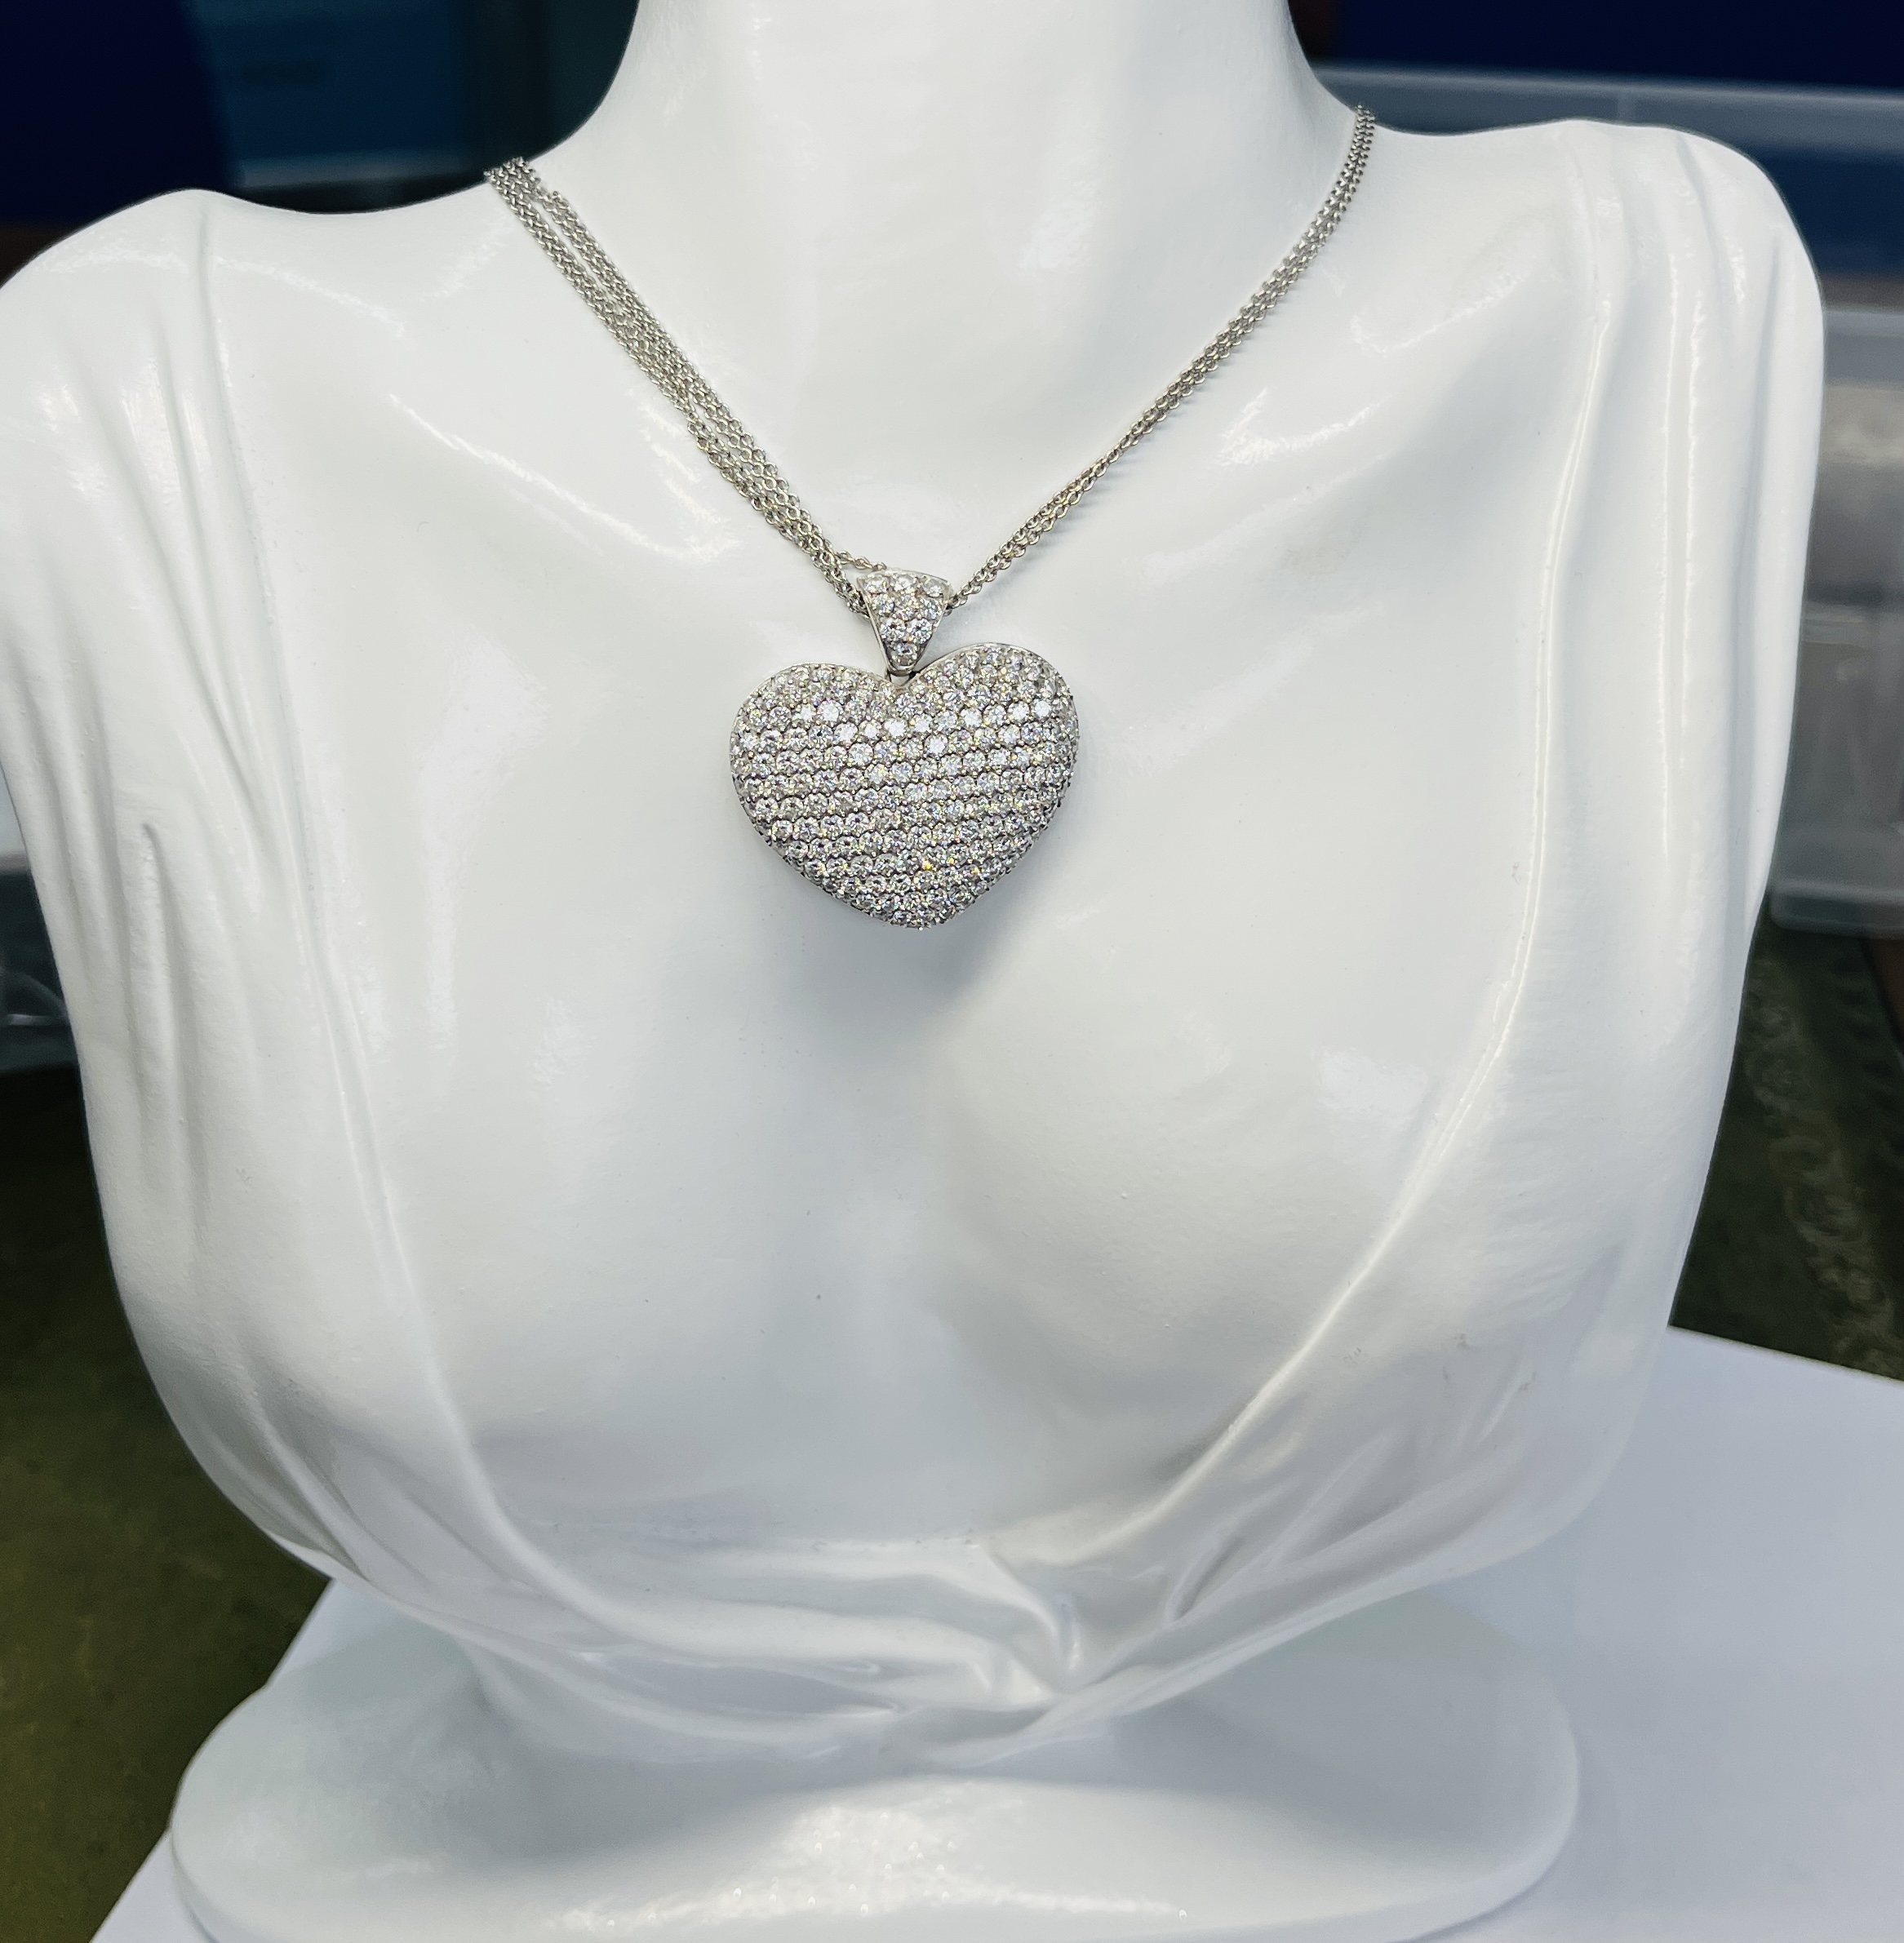 A Chopard style diamond heart pendant necklace set with approx. 5.28ct of diamond, circa 2007, set